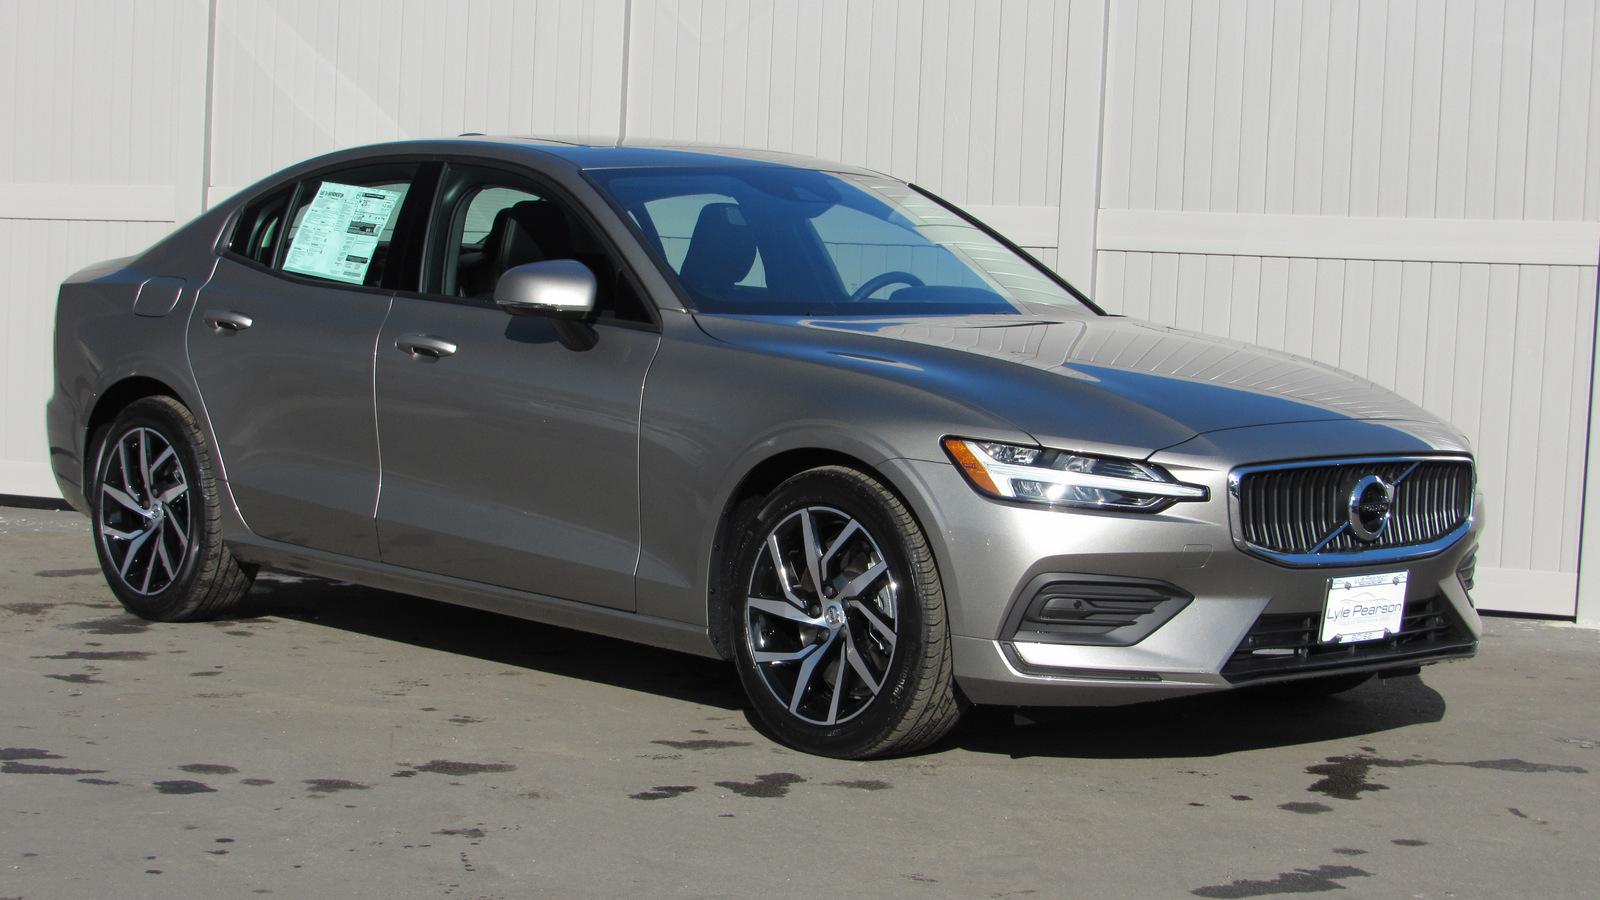 New 2019 Volvo S60 T6 AWD Momentum 4dr Car in Boise